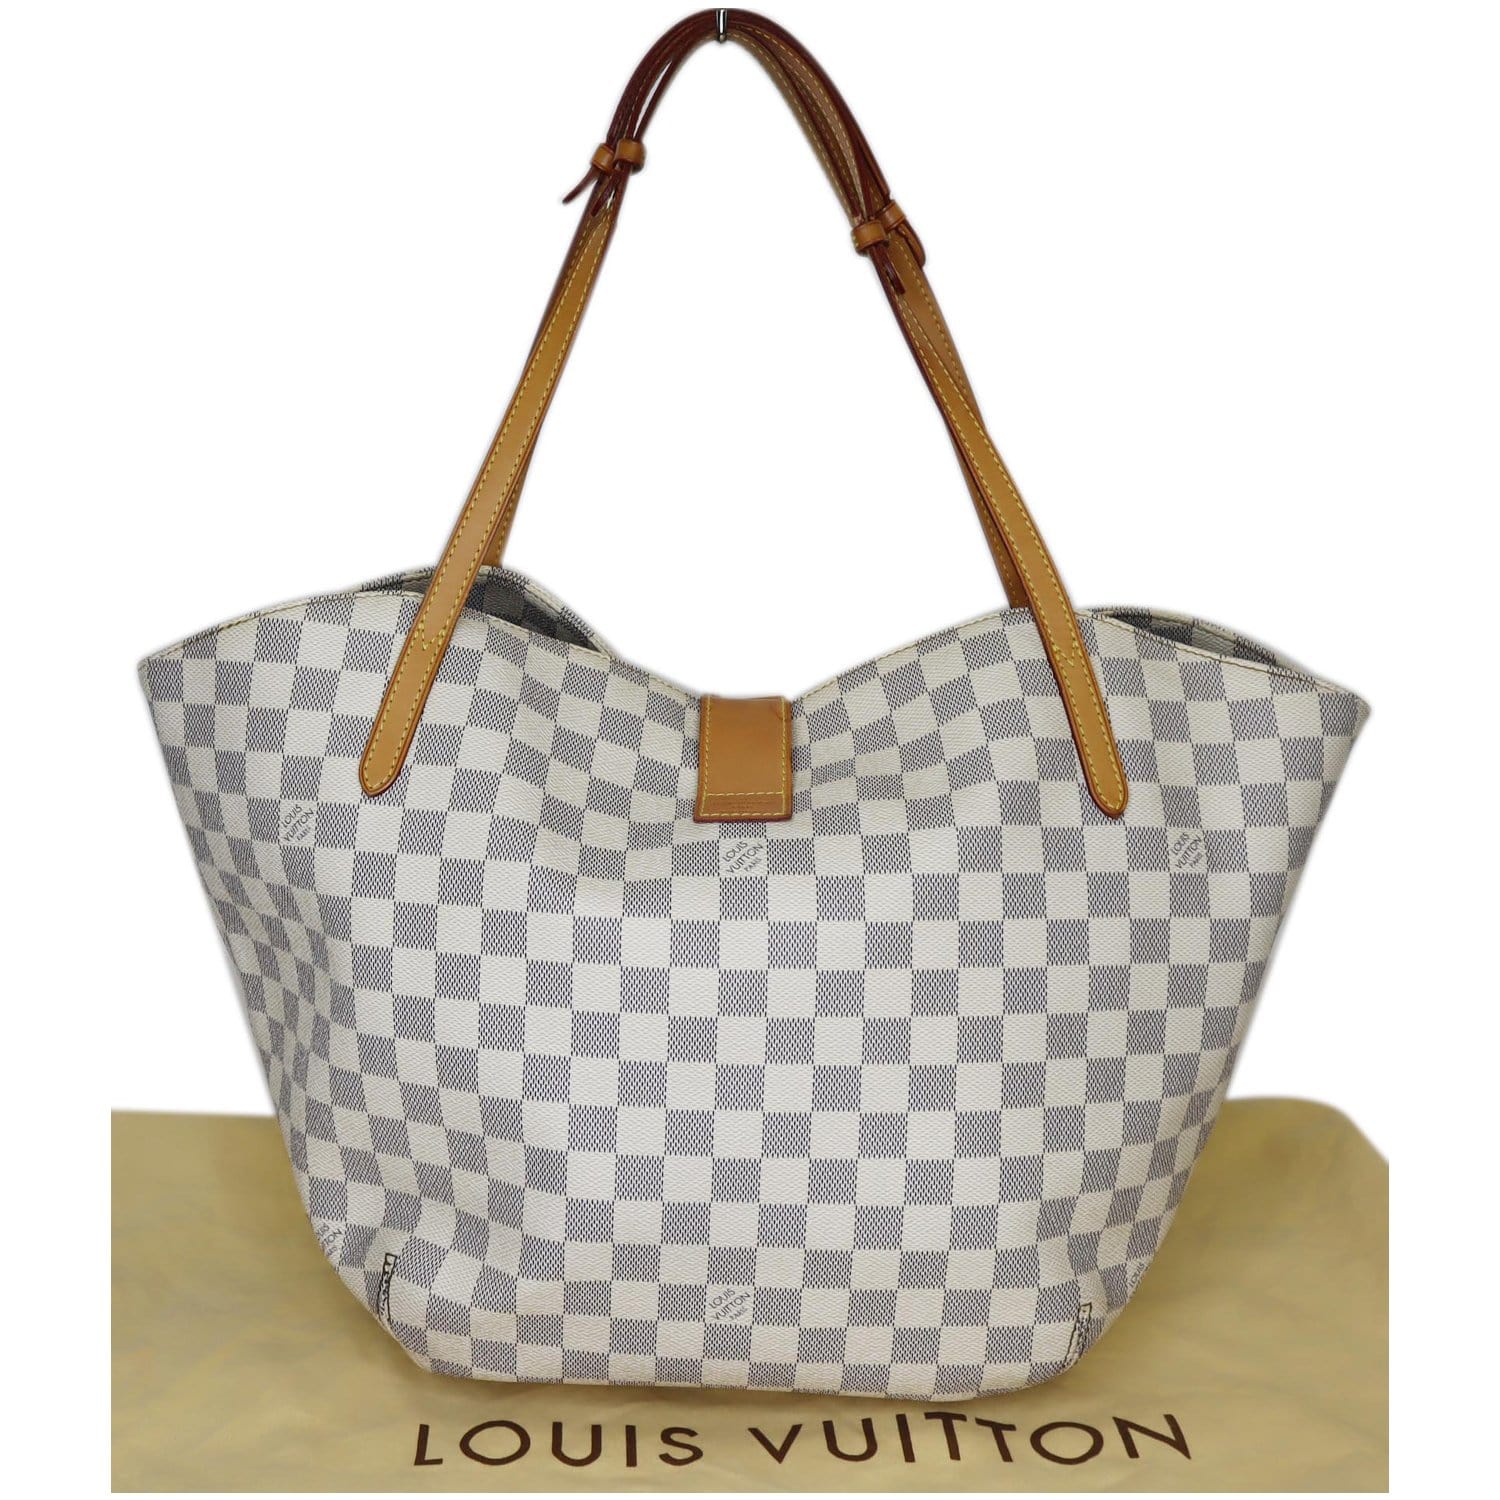 Louis Vuitton Neverfull Tote White Bags & Handbags for Women for sale